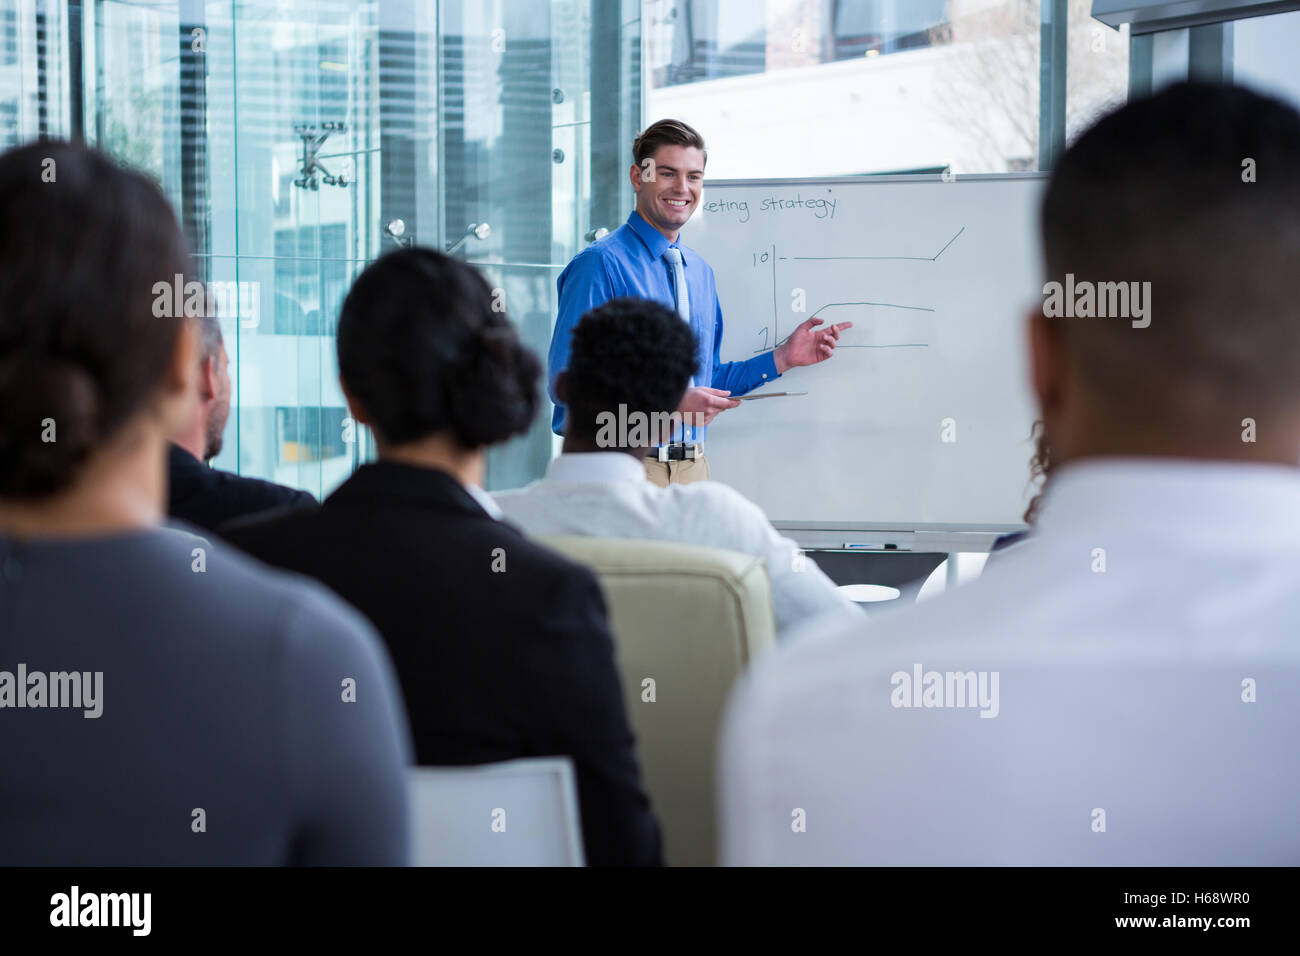 Businessman discussing on white board with coworkers Stock Photo